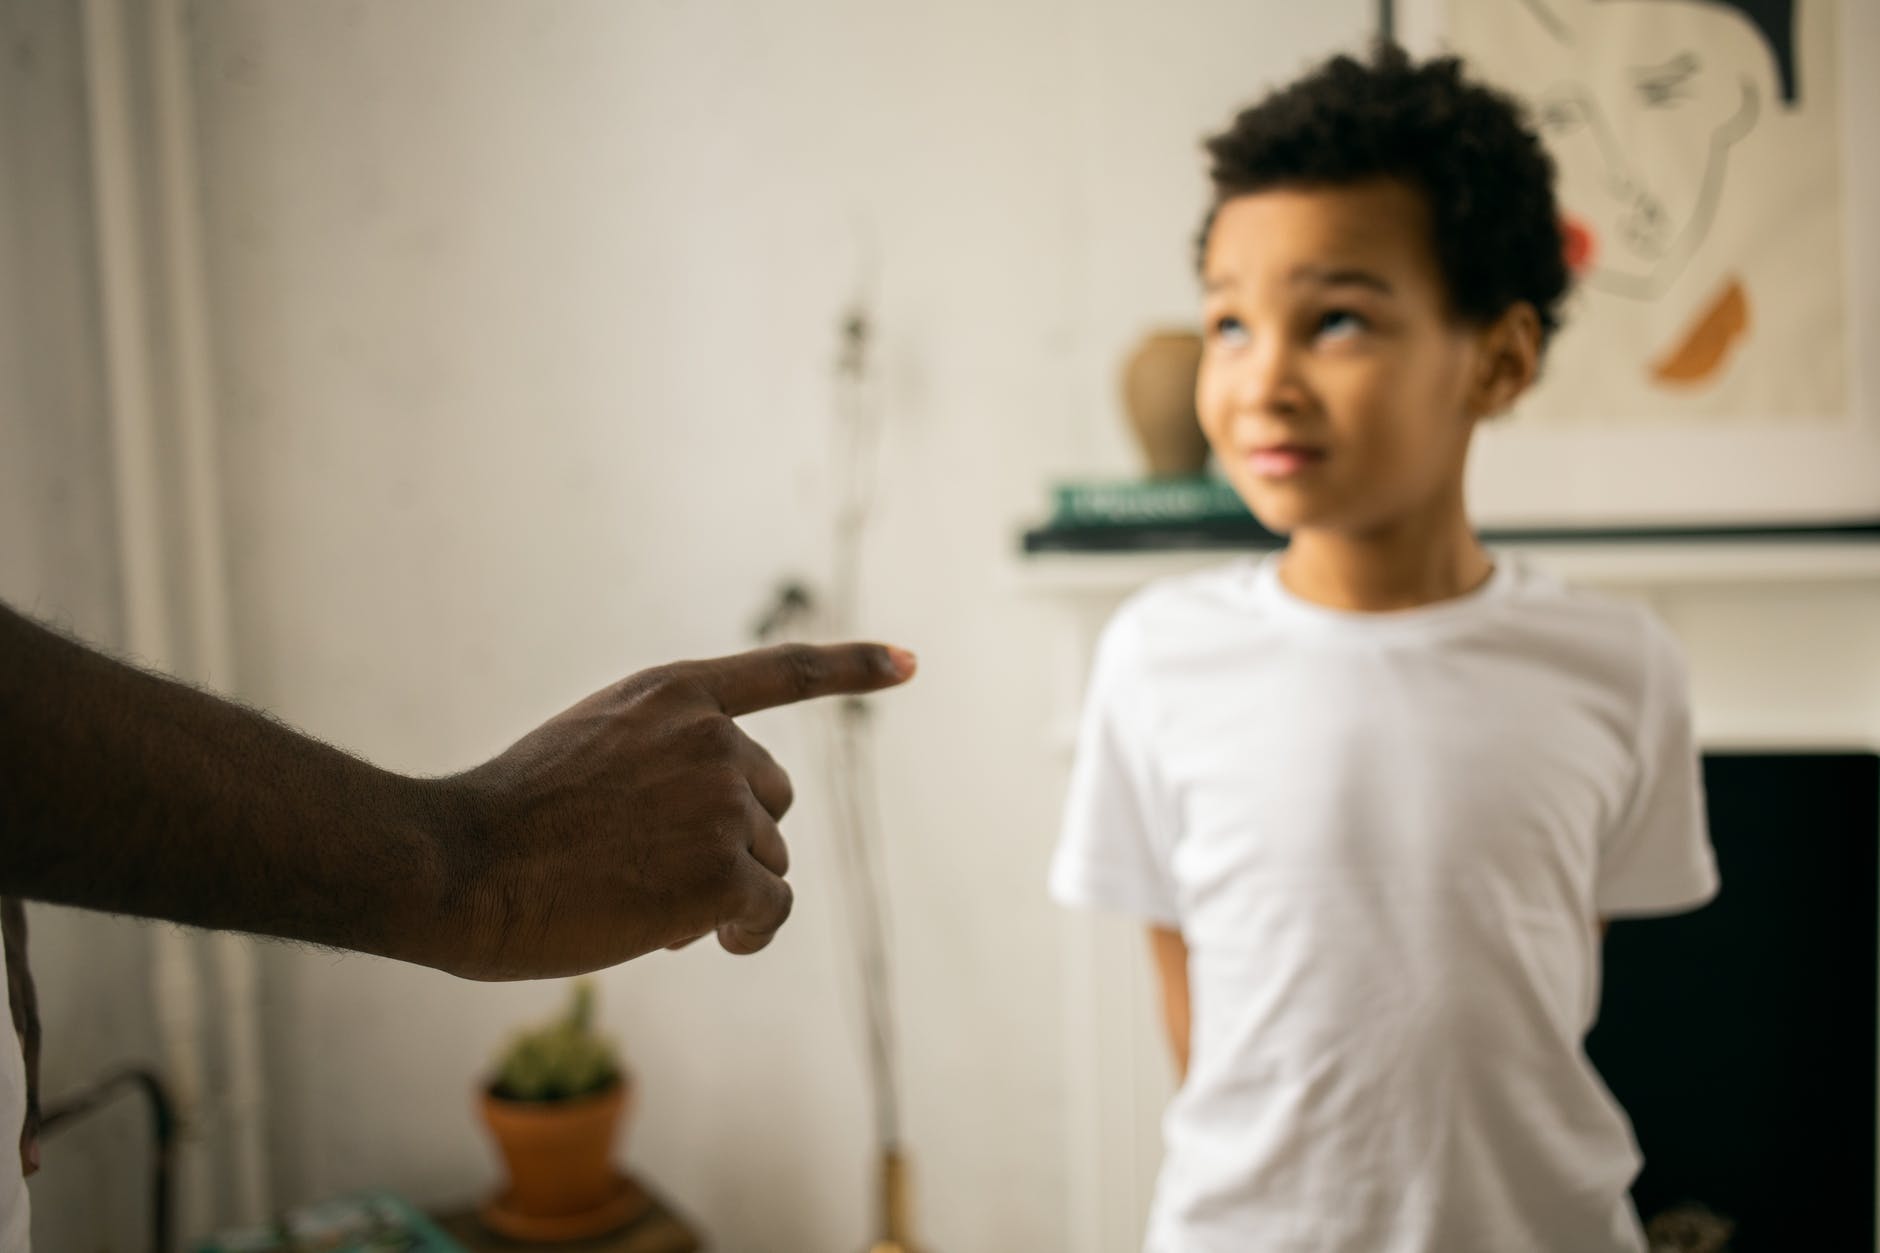 upset little ethic boy looking at faceless father during argument